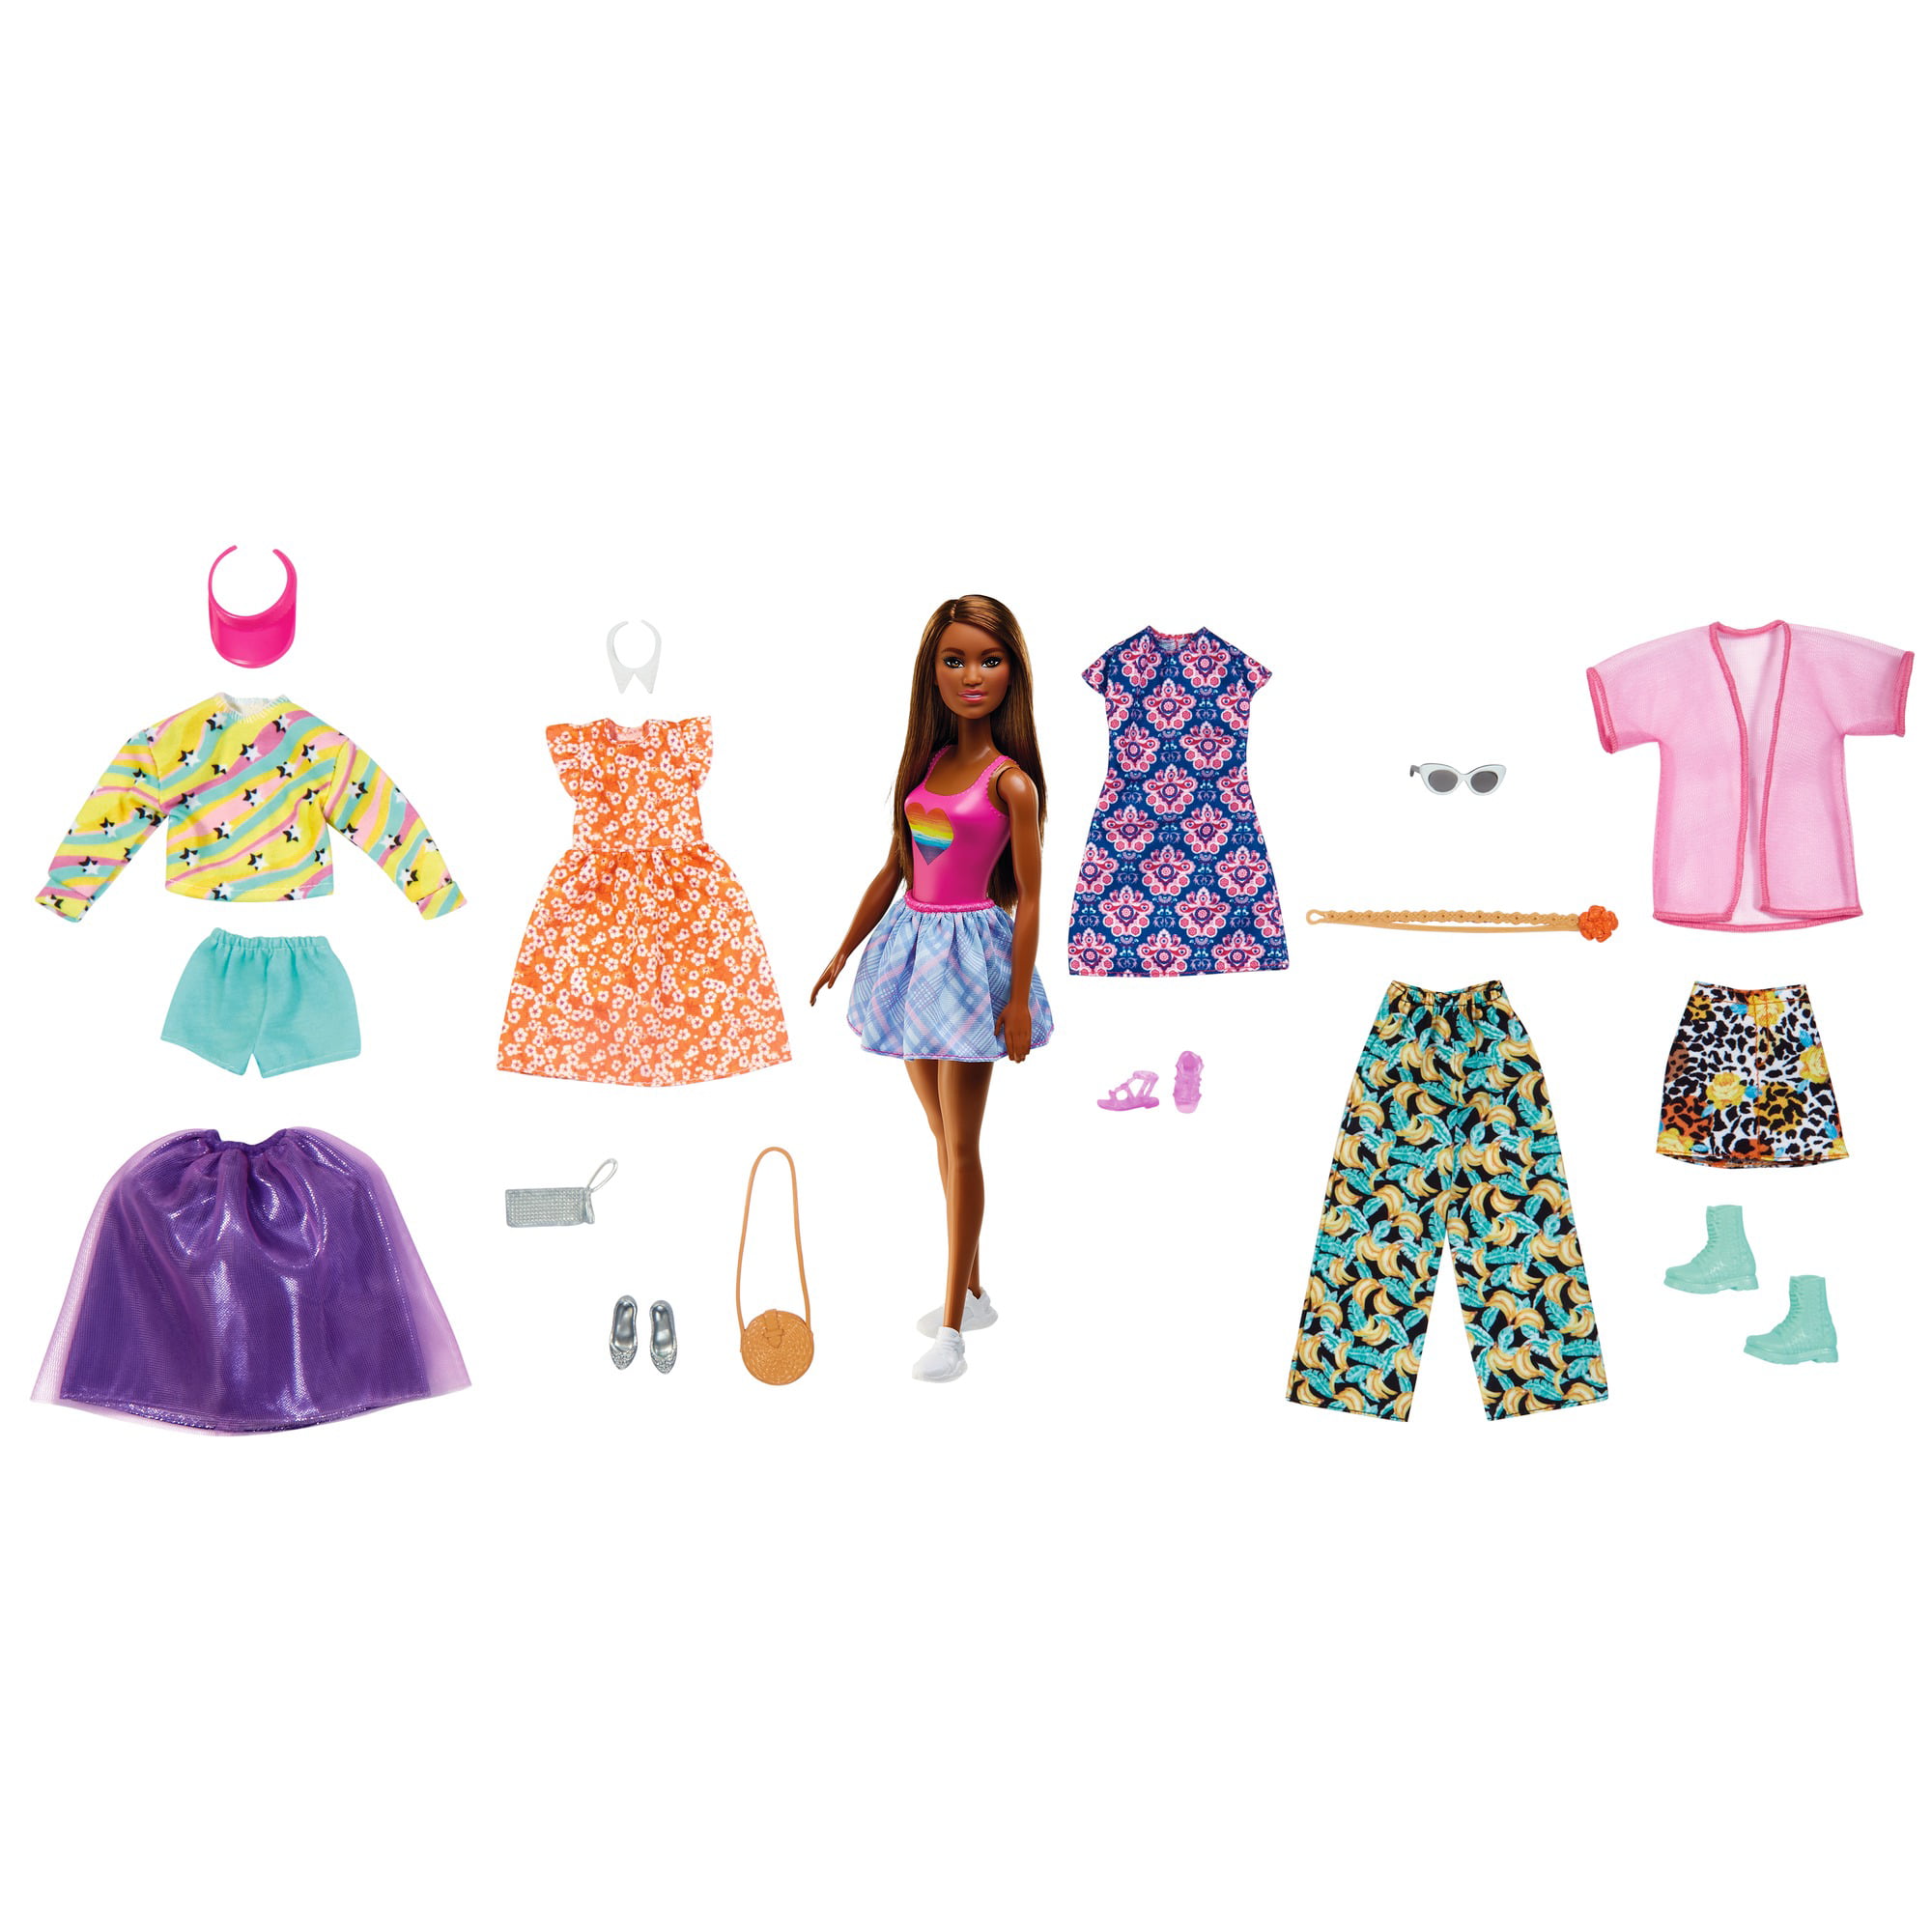 Barbie Doll, Brunette, 7 Outfits (19 Total Fashion & Accessories), 3 to 8 Years Old